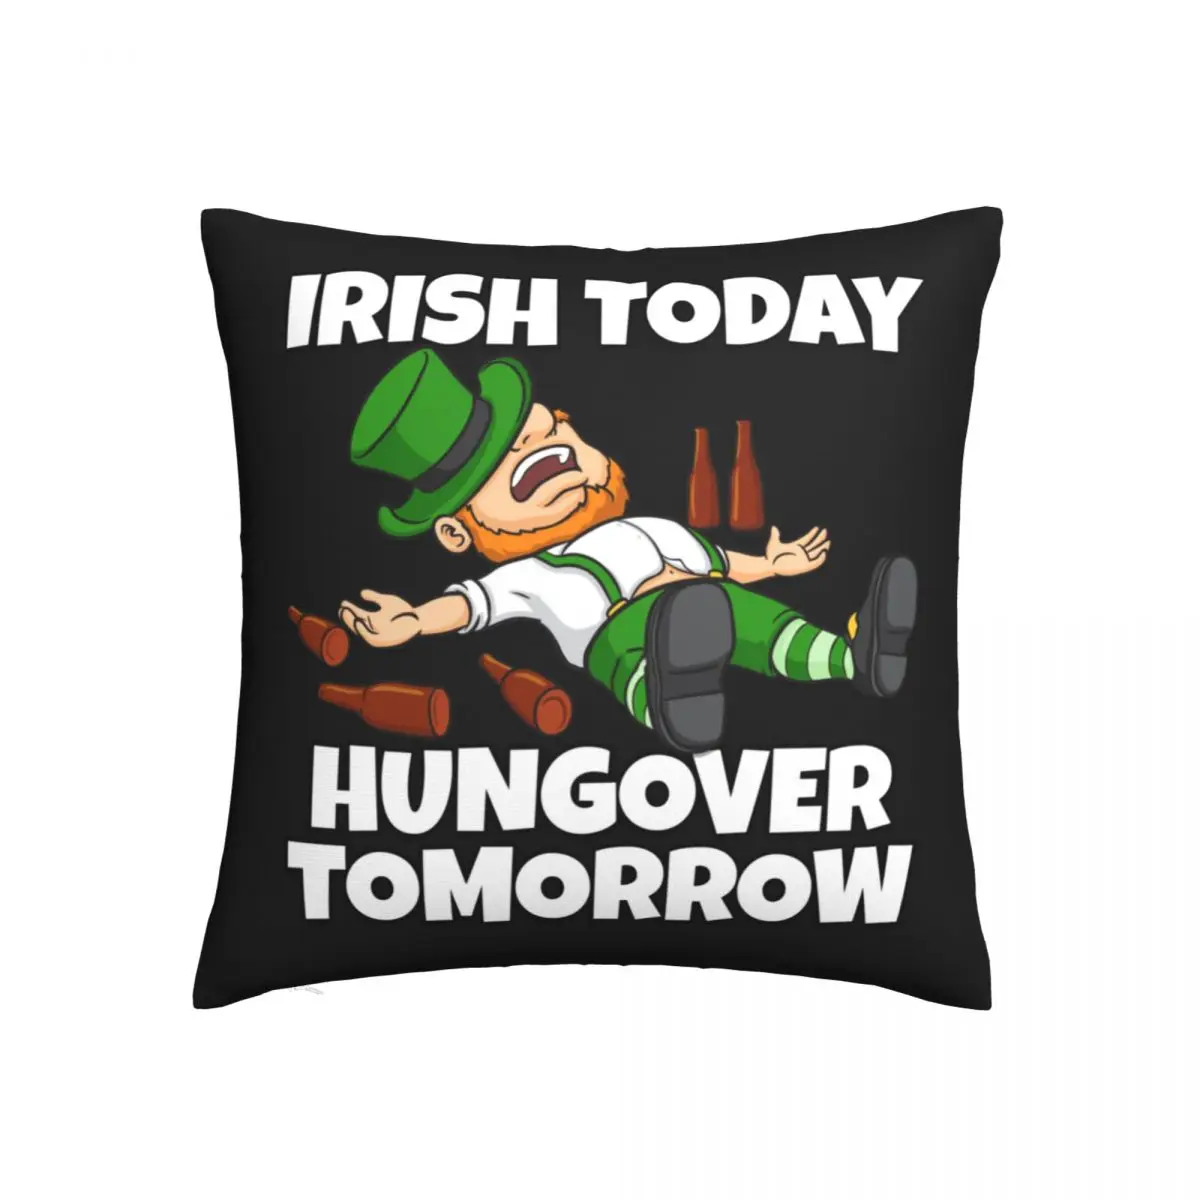 

Irish Today Hungover Tomorrow Pillow Case St Patricks Day Spring Square Pillowcase Polyester Hugging Zipper Cover